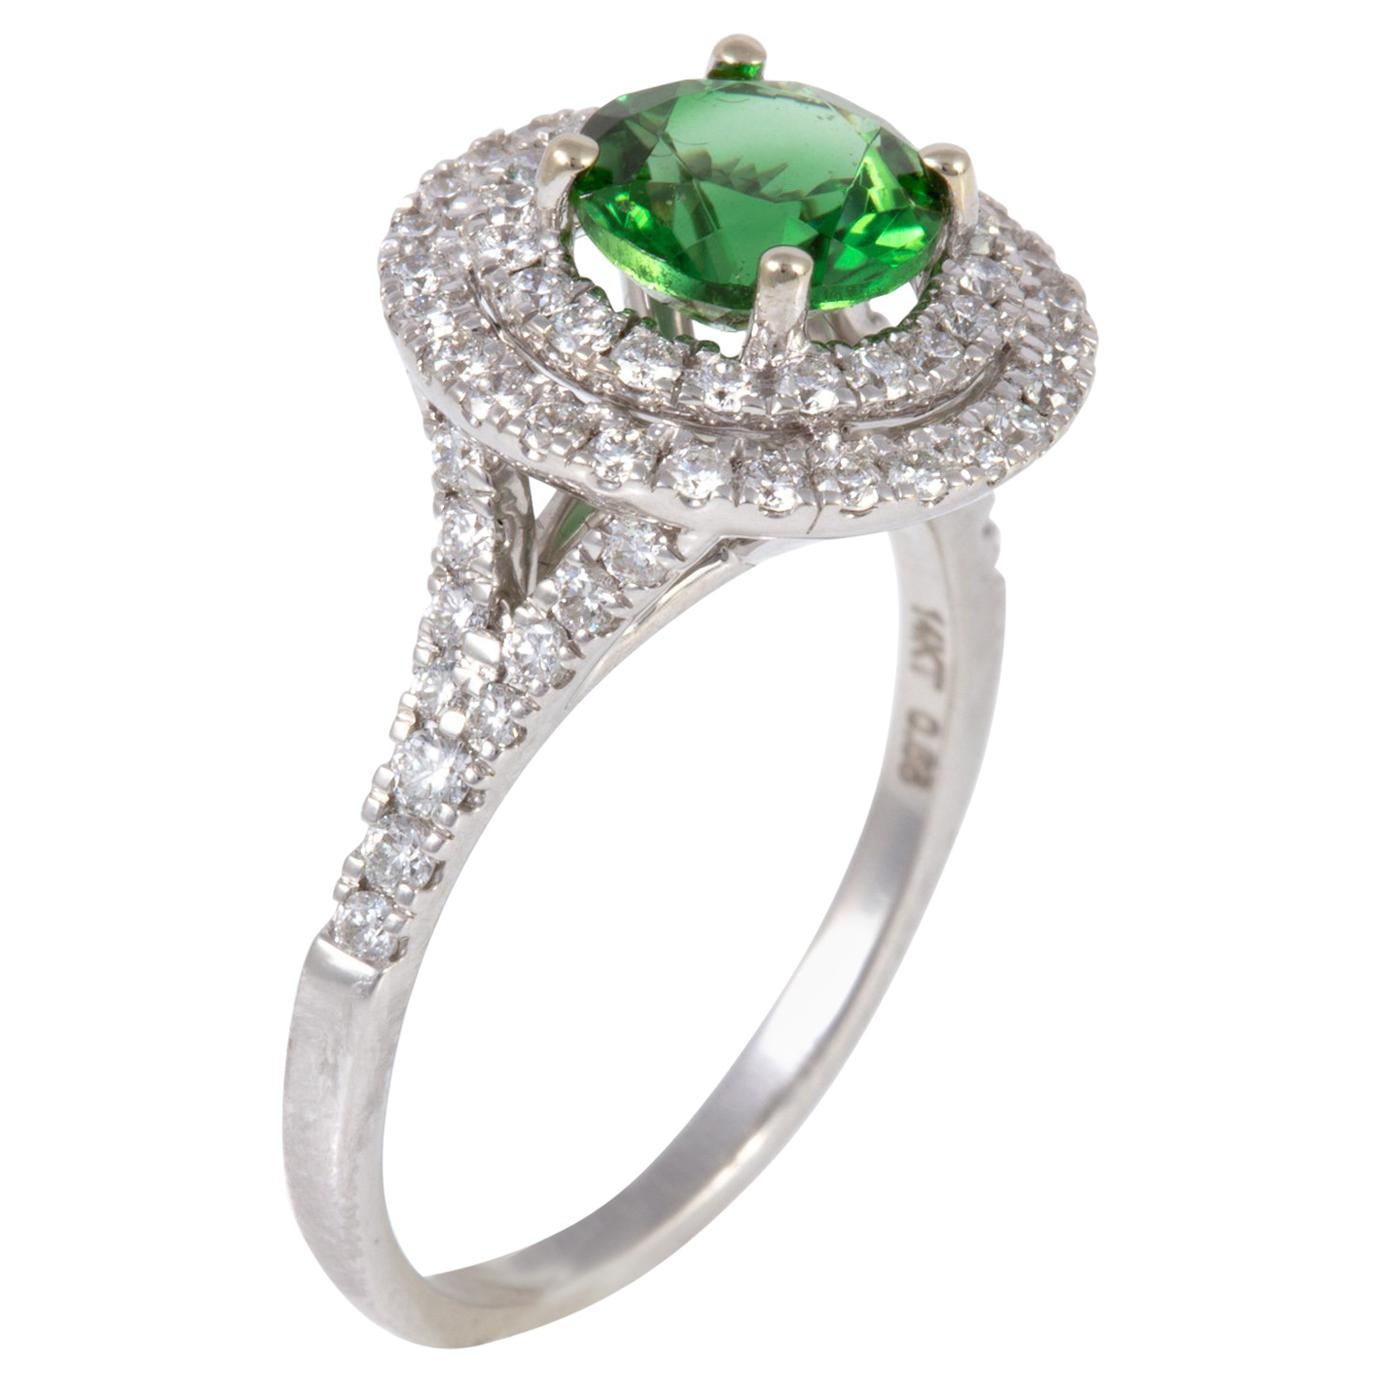 Exceptionally Well Cut 1.26 Carat Chrome Tourmaline and Diamond Ring For Sale